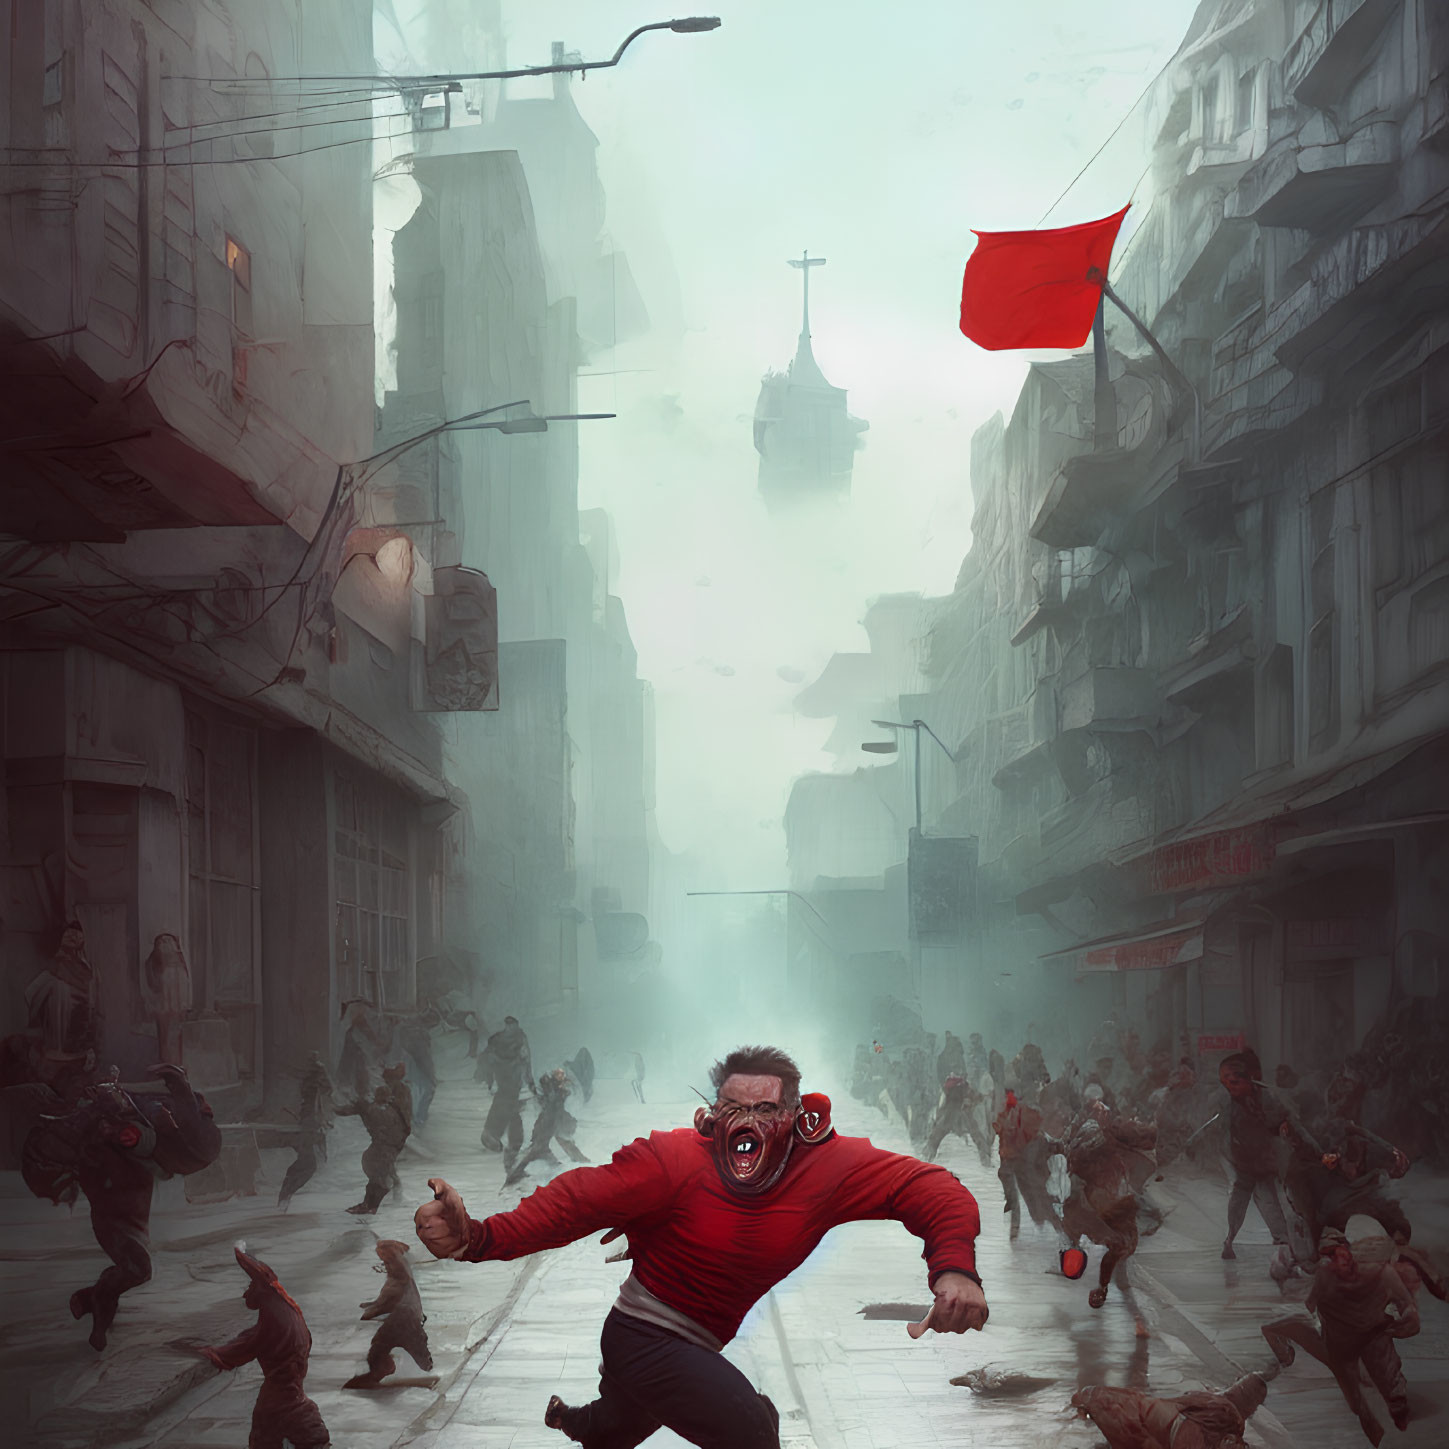 Foggy urban street with panicked crowd and person in red jacket and gas mask under red flag